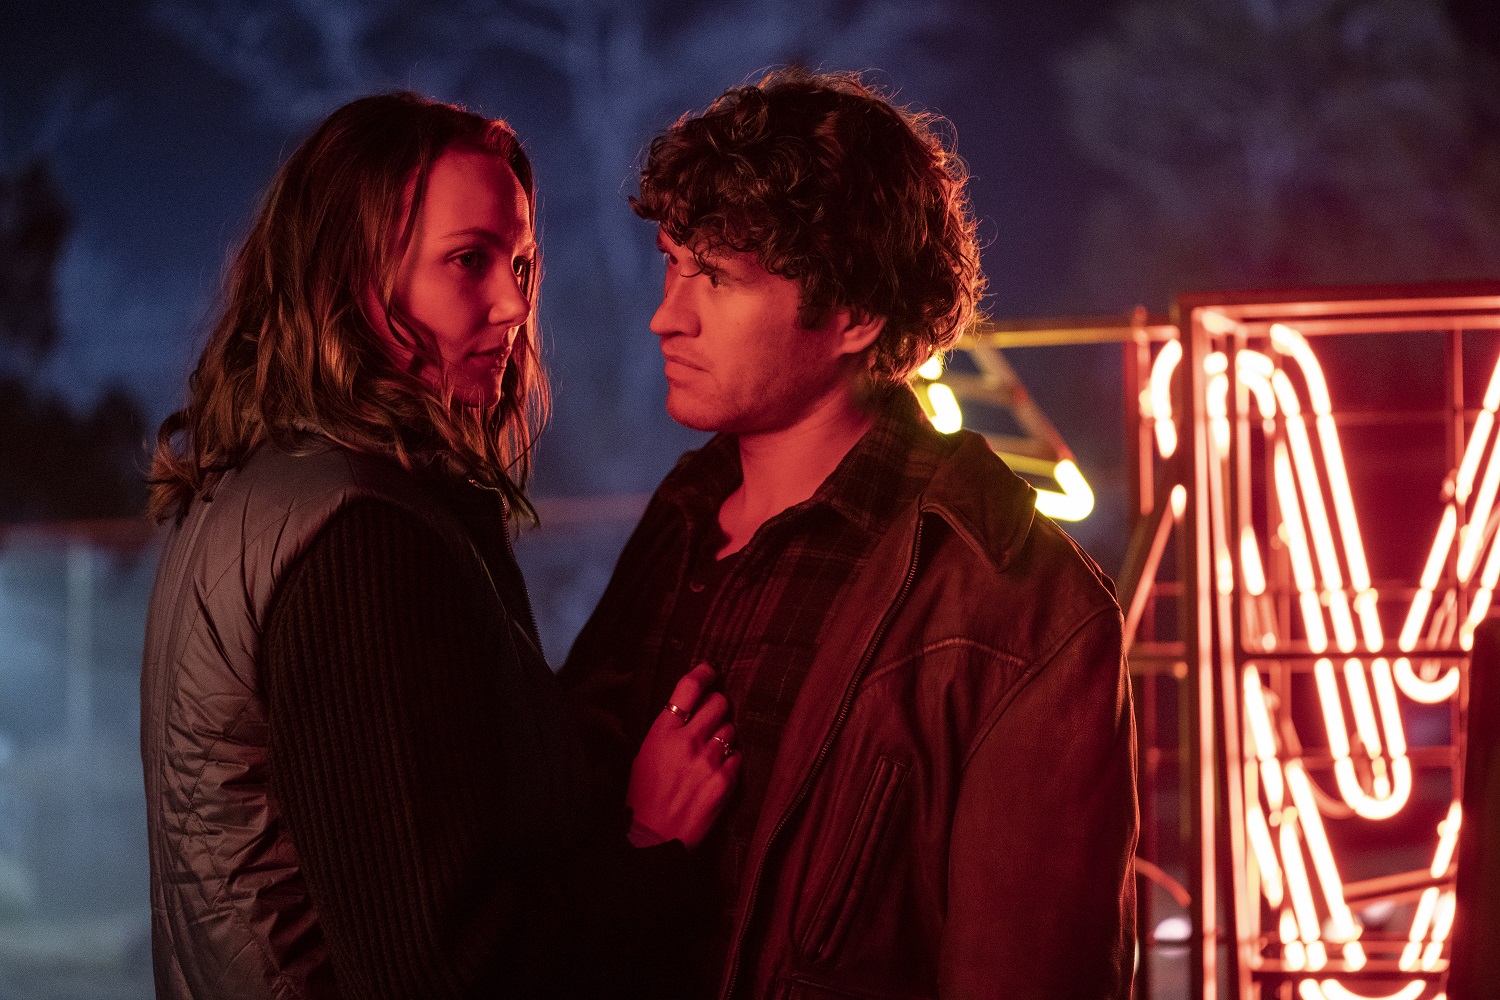 Allyson (Andi Matichak) and Corey (Rohan Campbell) in Halloween Ends